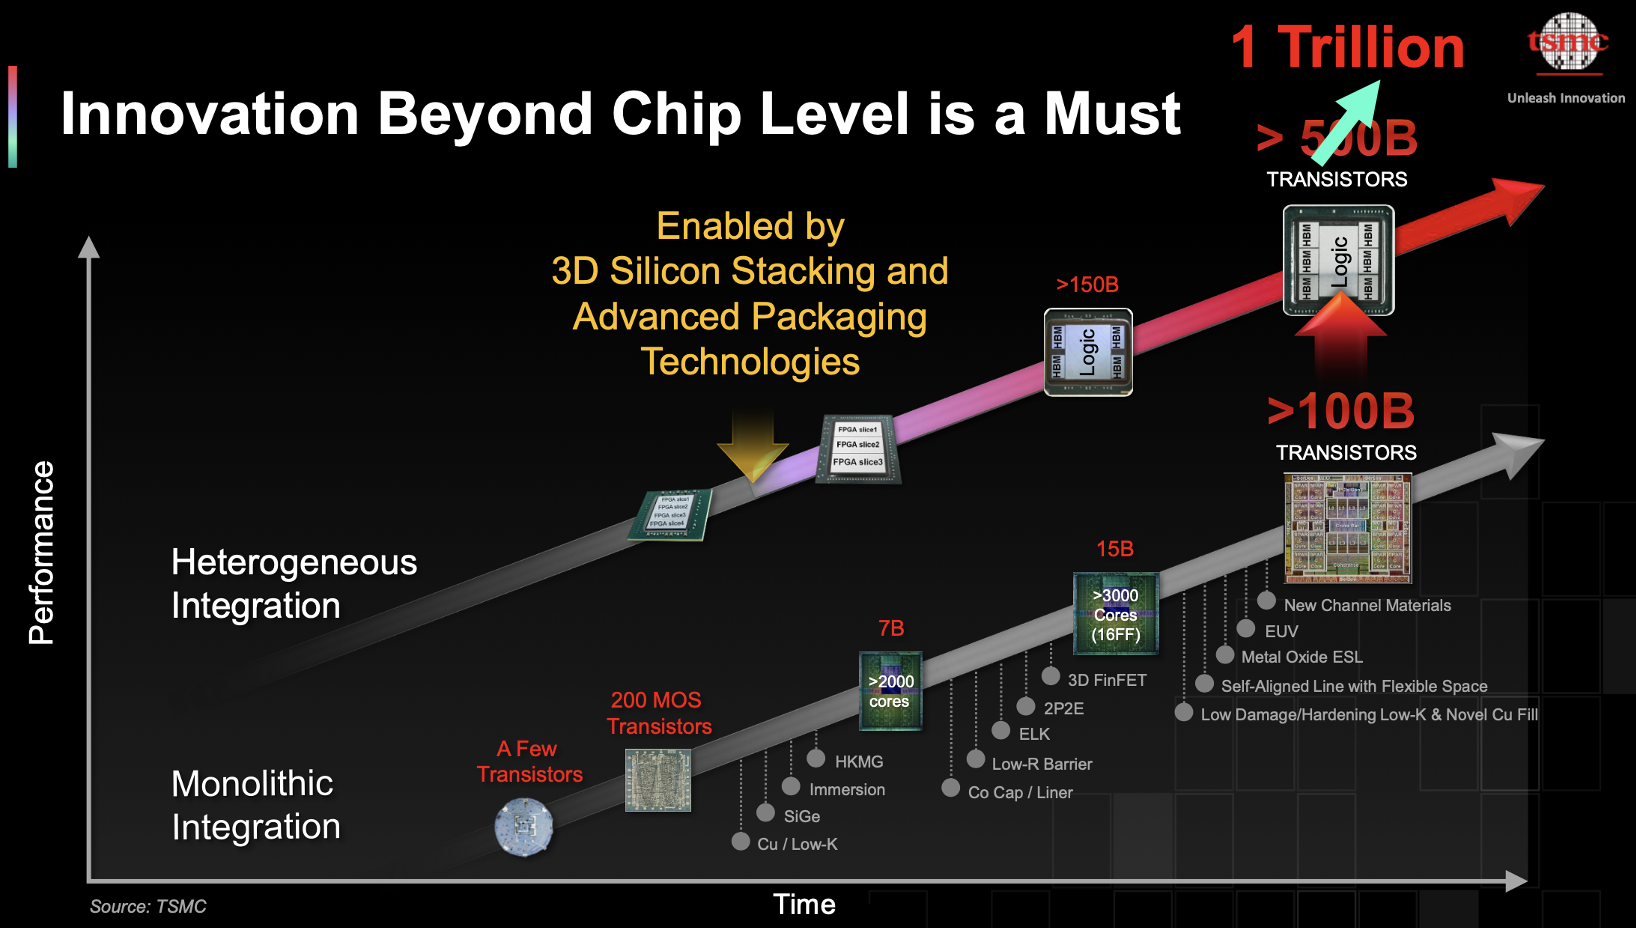 Innovation Beyond Chip Level is a Must